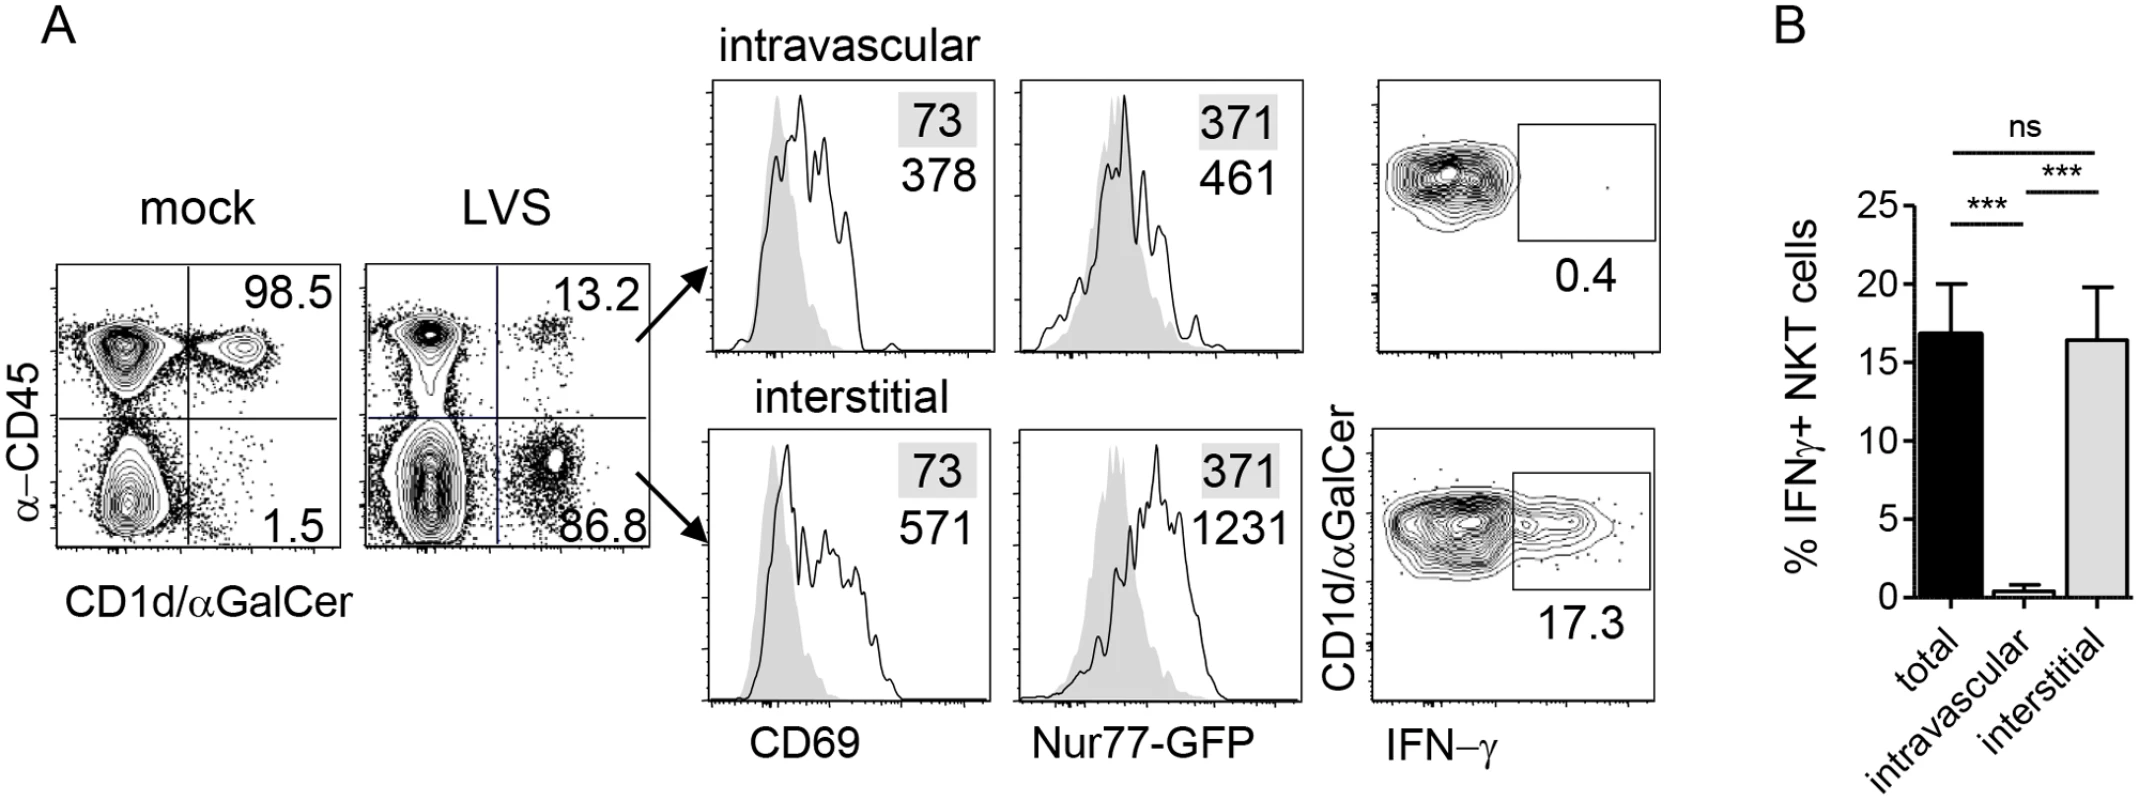 NKT cell activation by LVS is TCR-dependent.